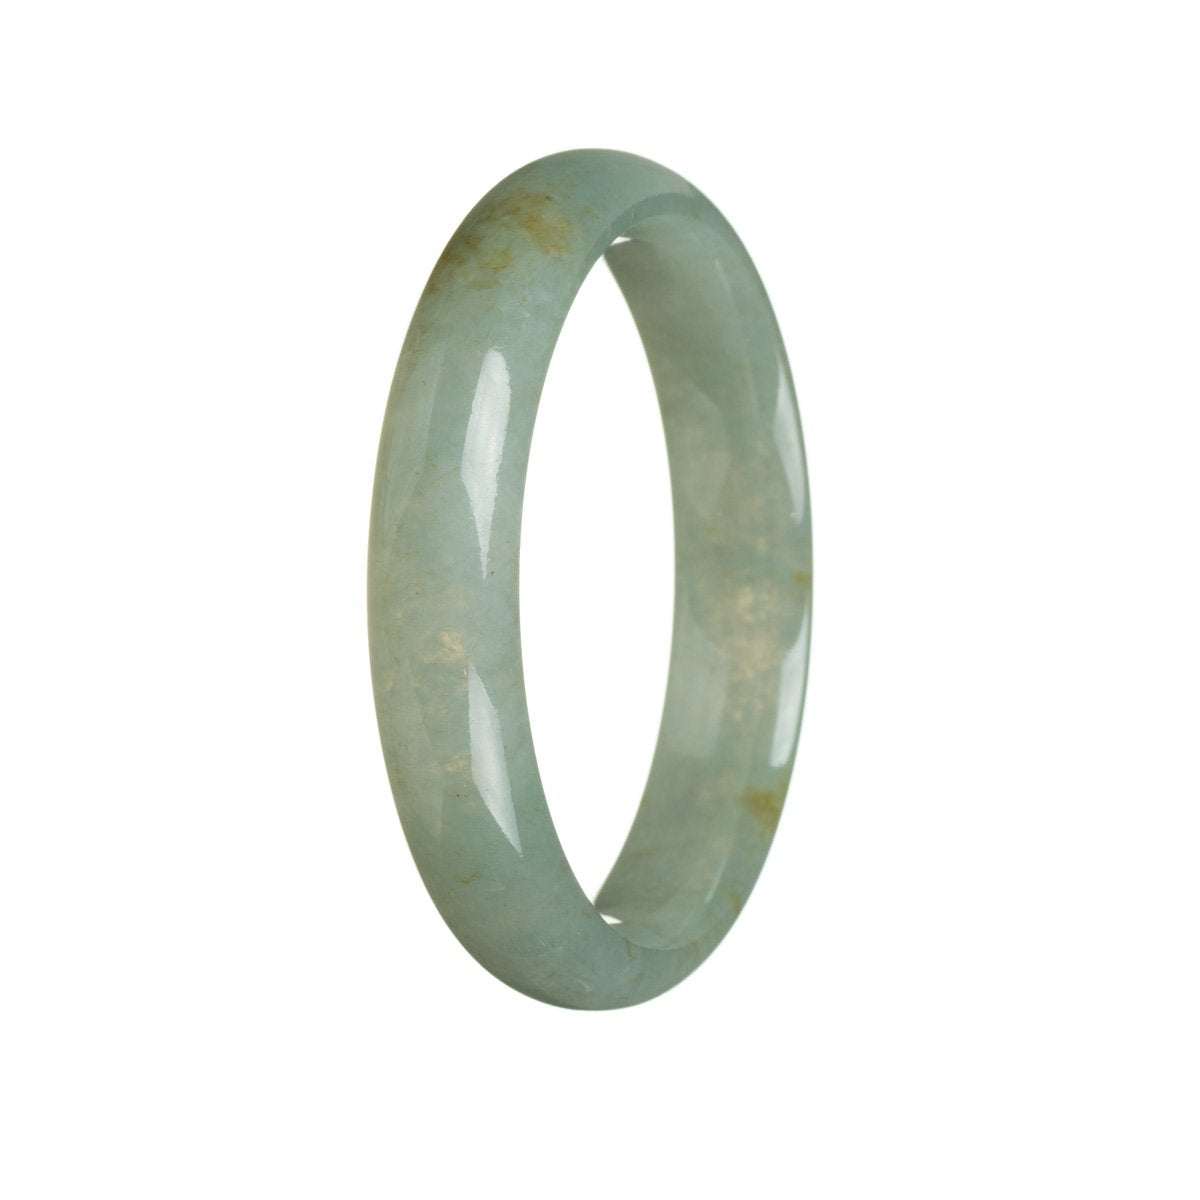 A close-up image of a grey traditional jade bangle with a half-moon shape, measuring 56mm. This bangle is certified Grade A and is part of the MAYS™ collection.